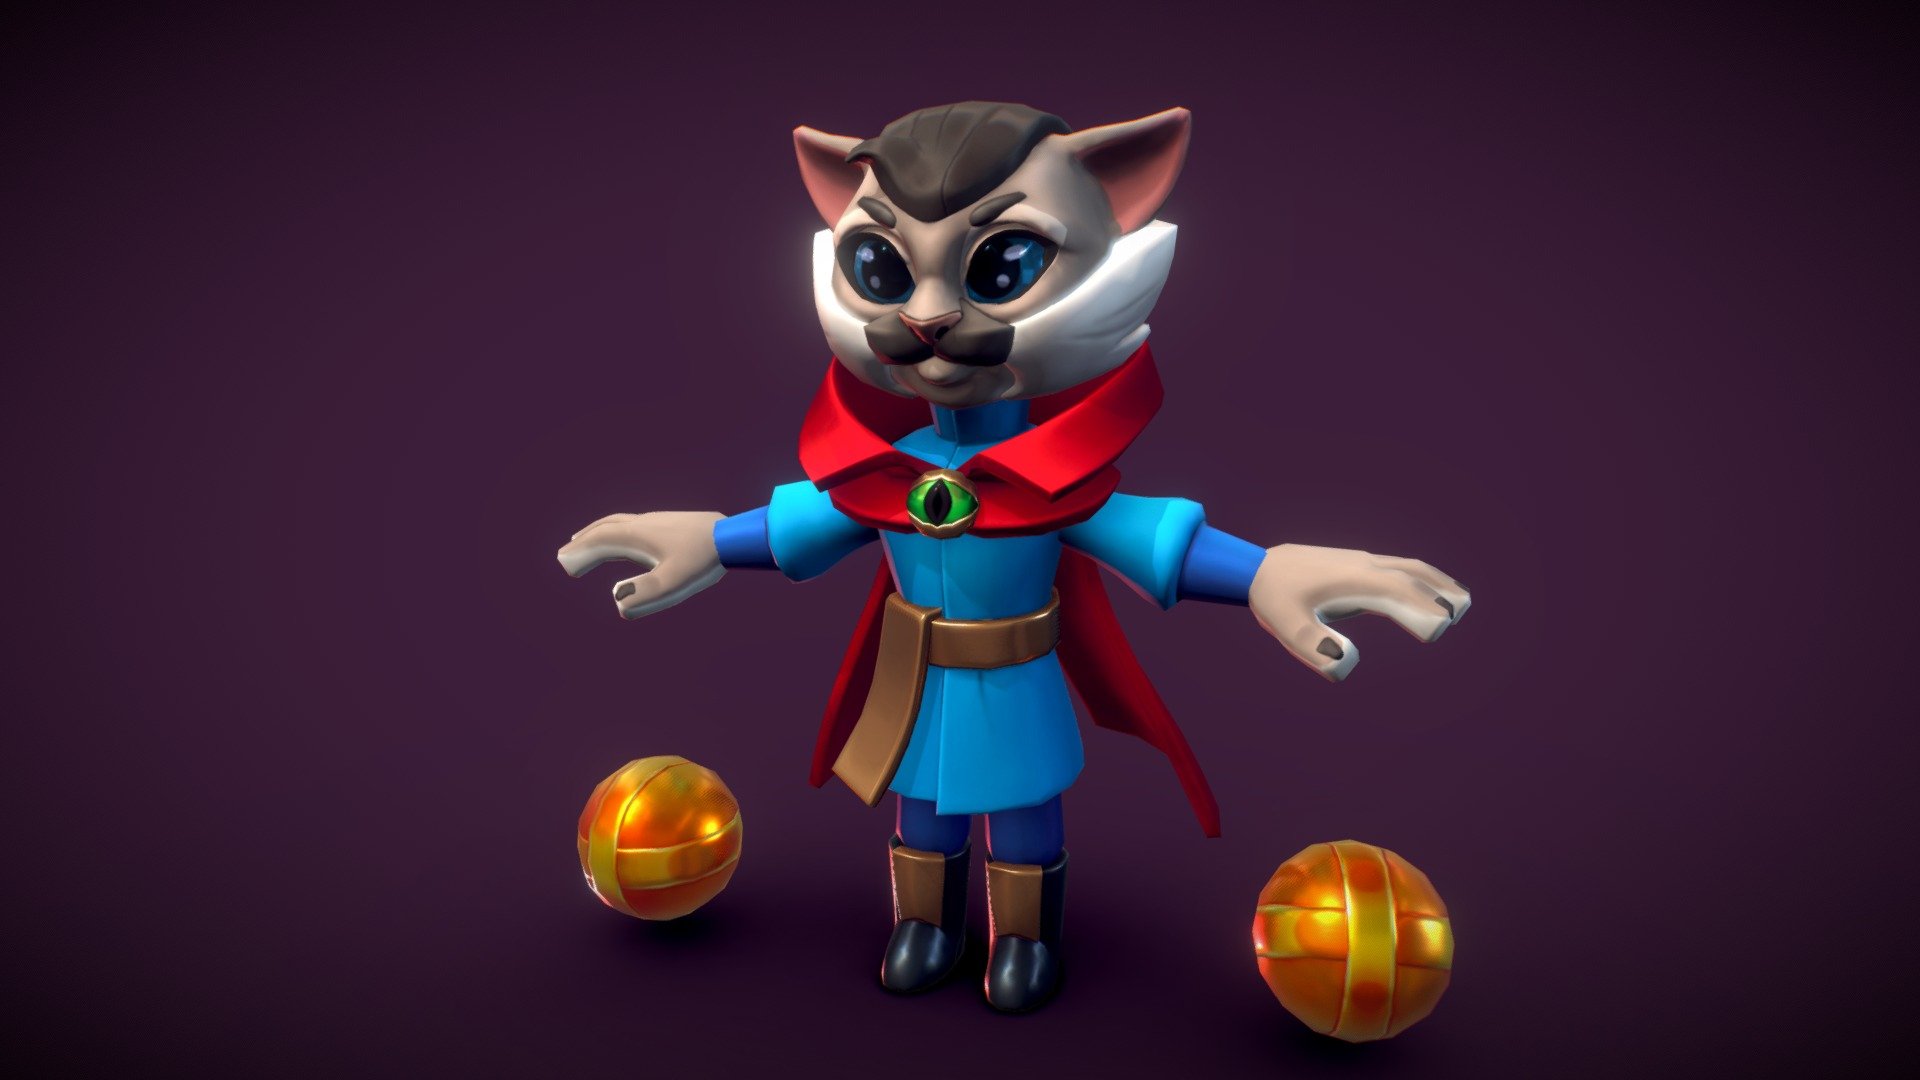 Character modeling and texturing for the mobile game Caterra 3d model